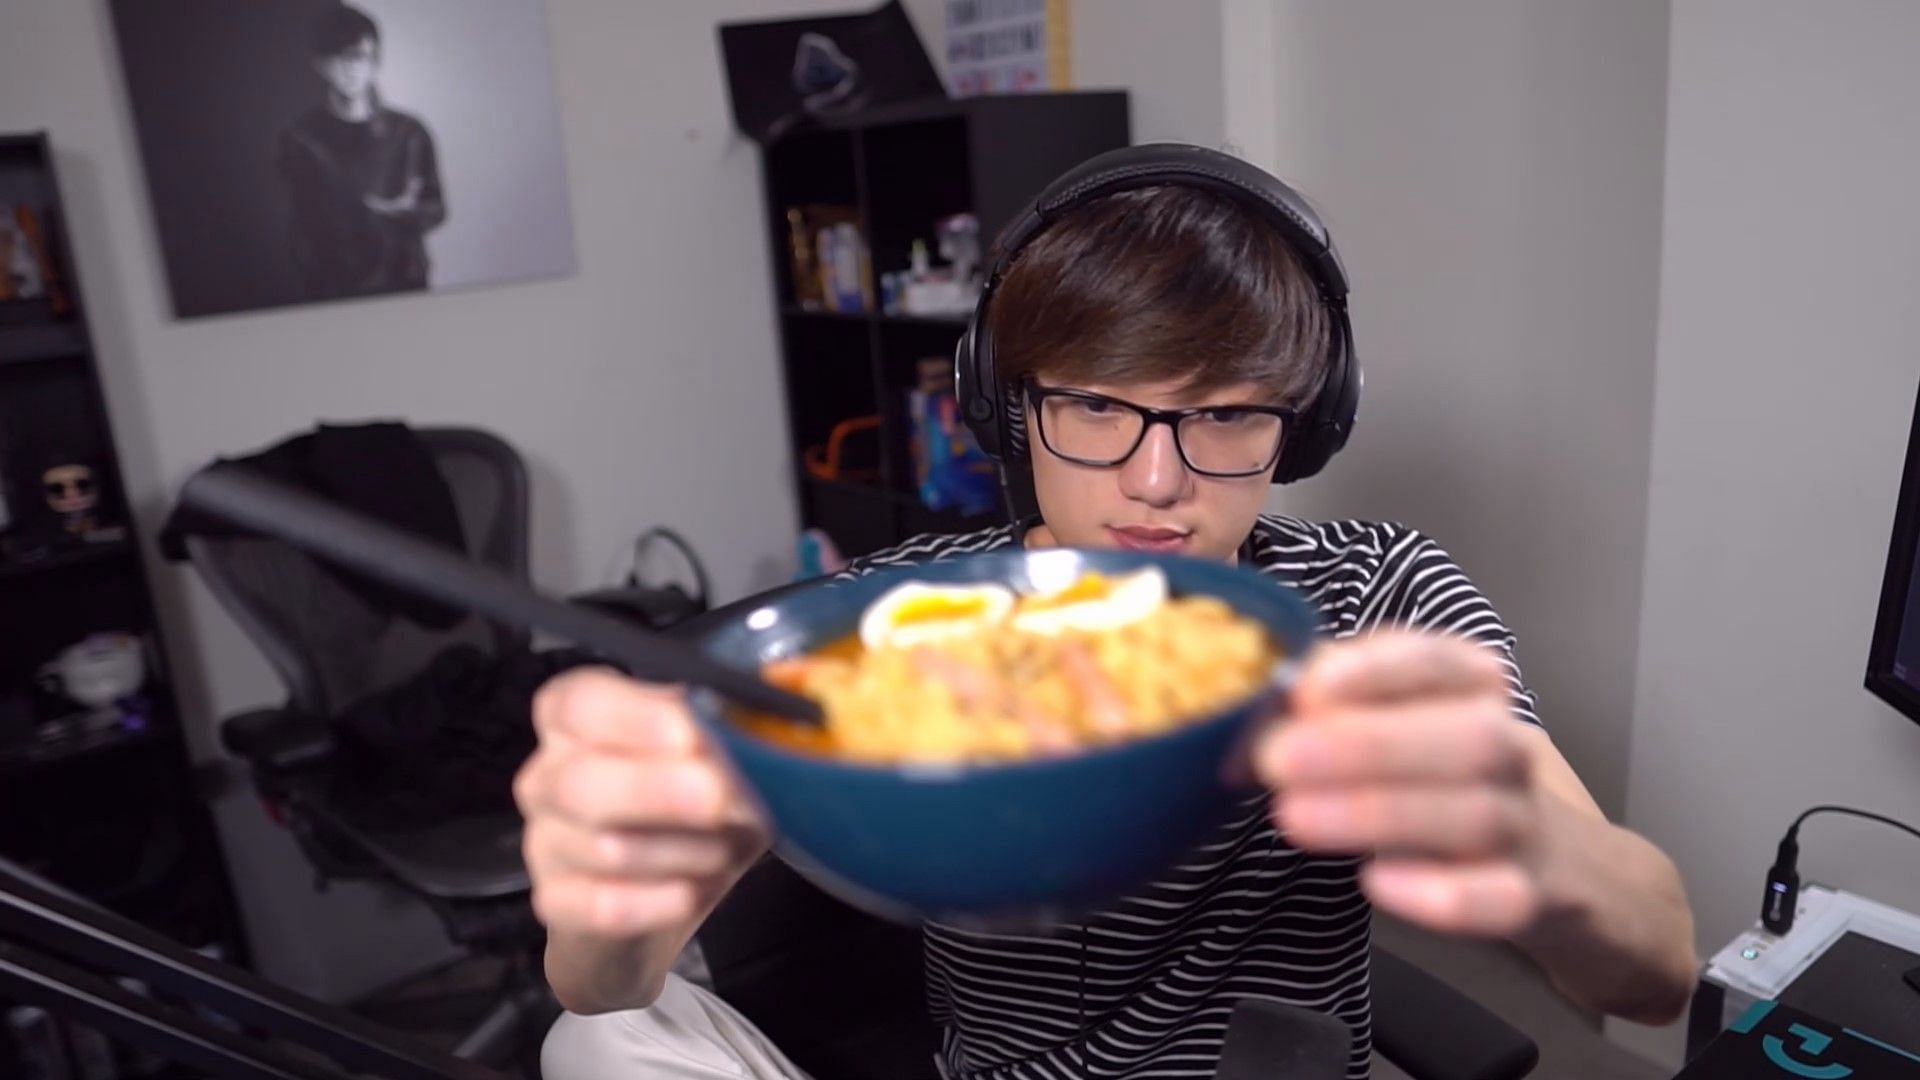 iiTzTimmy shows off his food while explaining why he won&#039;t join an esports organization (Image via Twitch/iiTzTimmy)